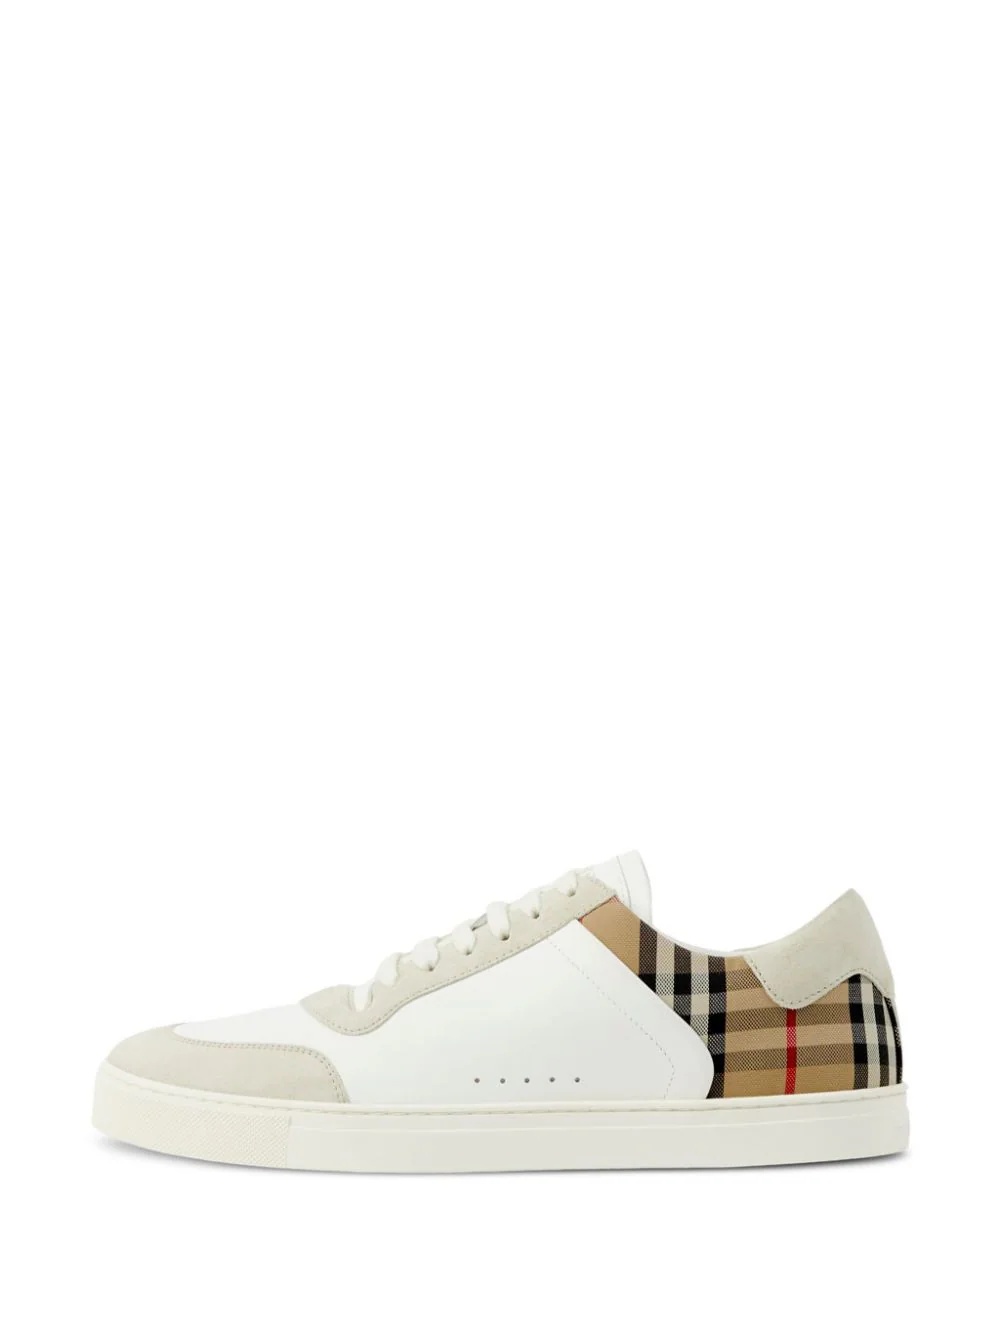 BURBERRY Men Vintage Check Panelled Sneakers - 2